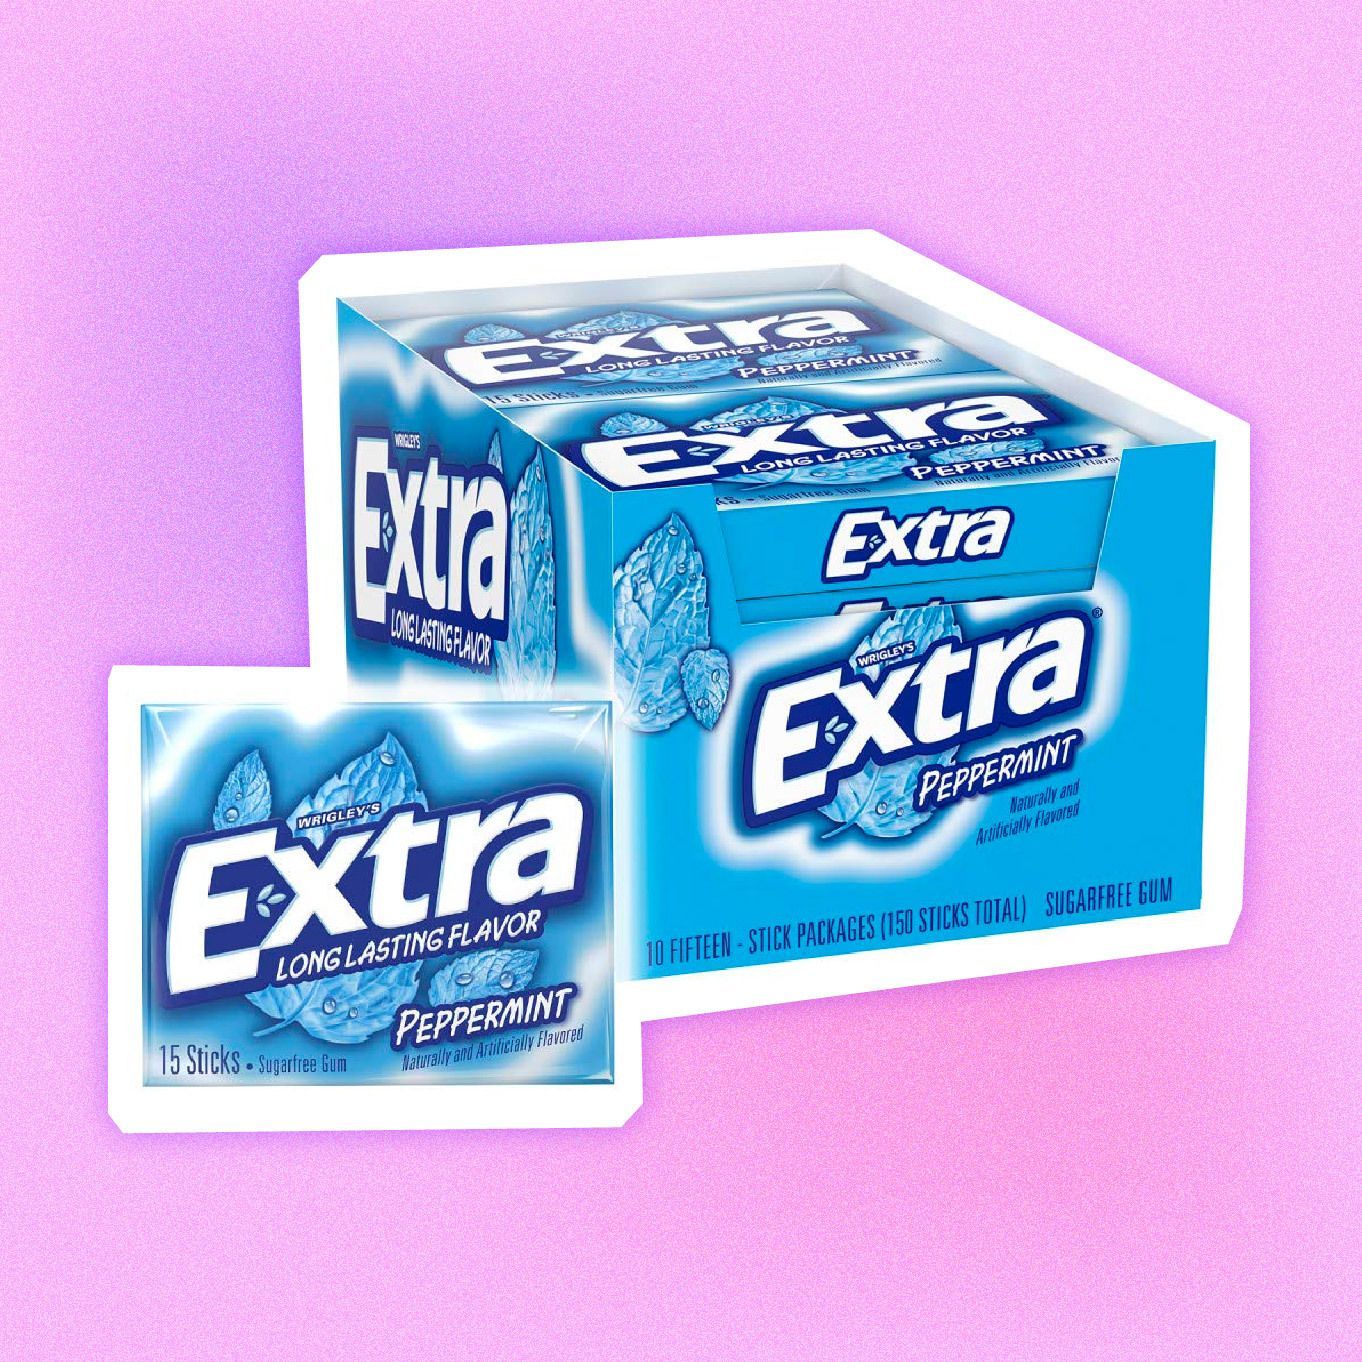 Extra Peppermint Chewing Gum (Pack of 10)